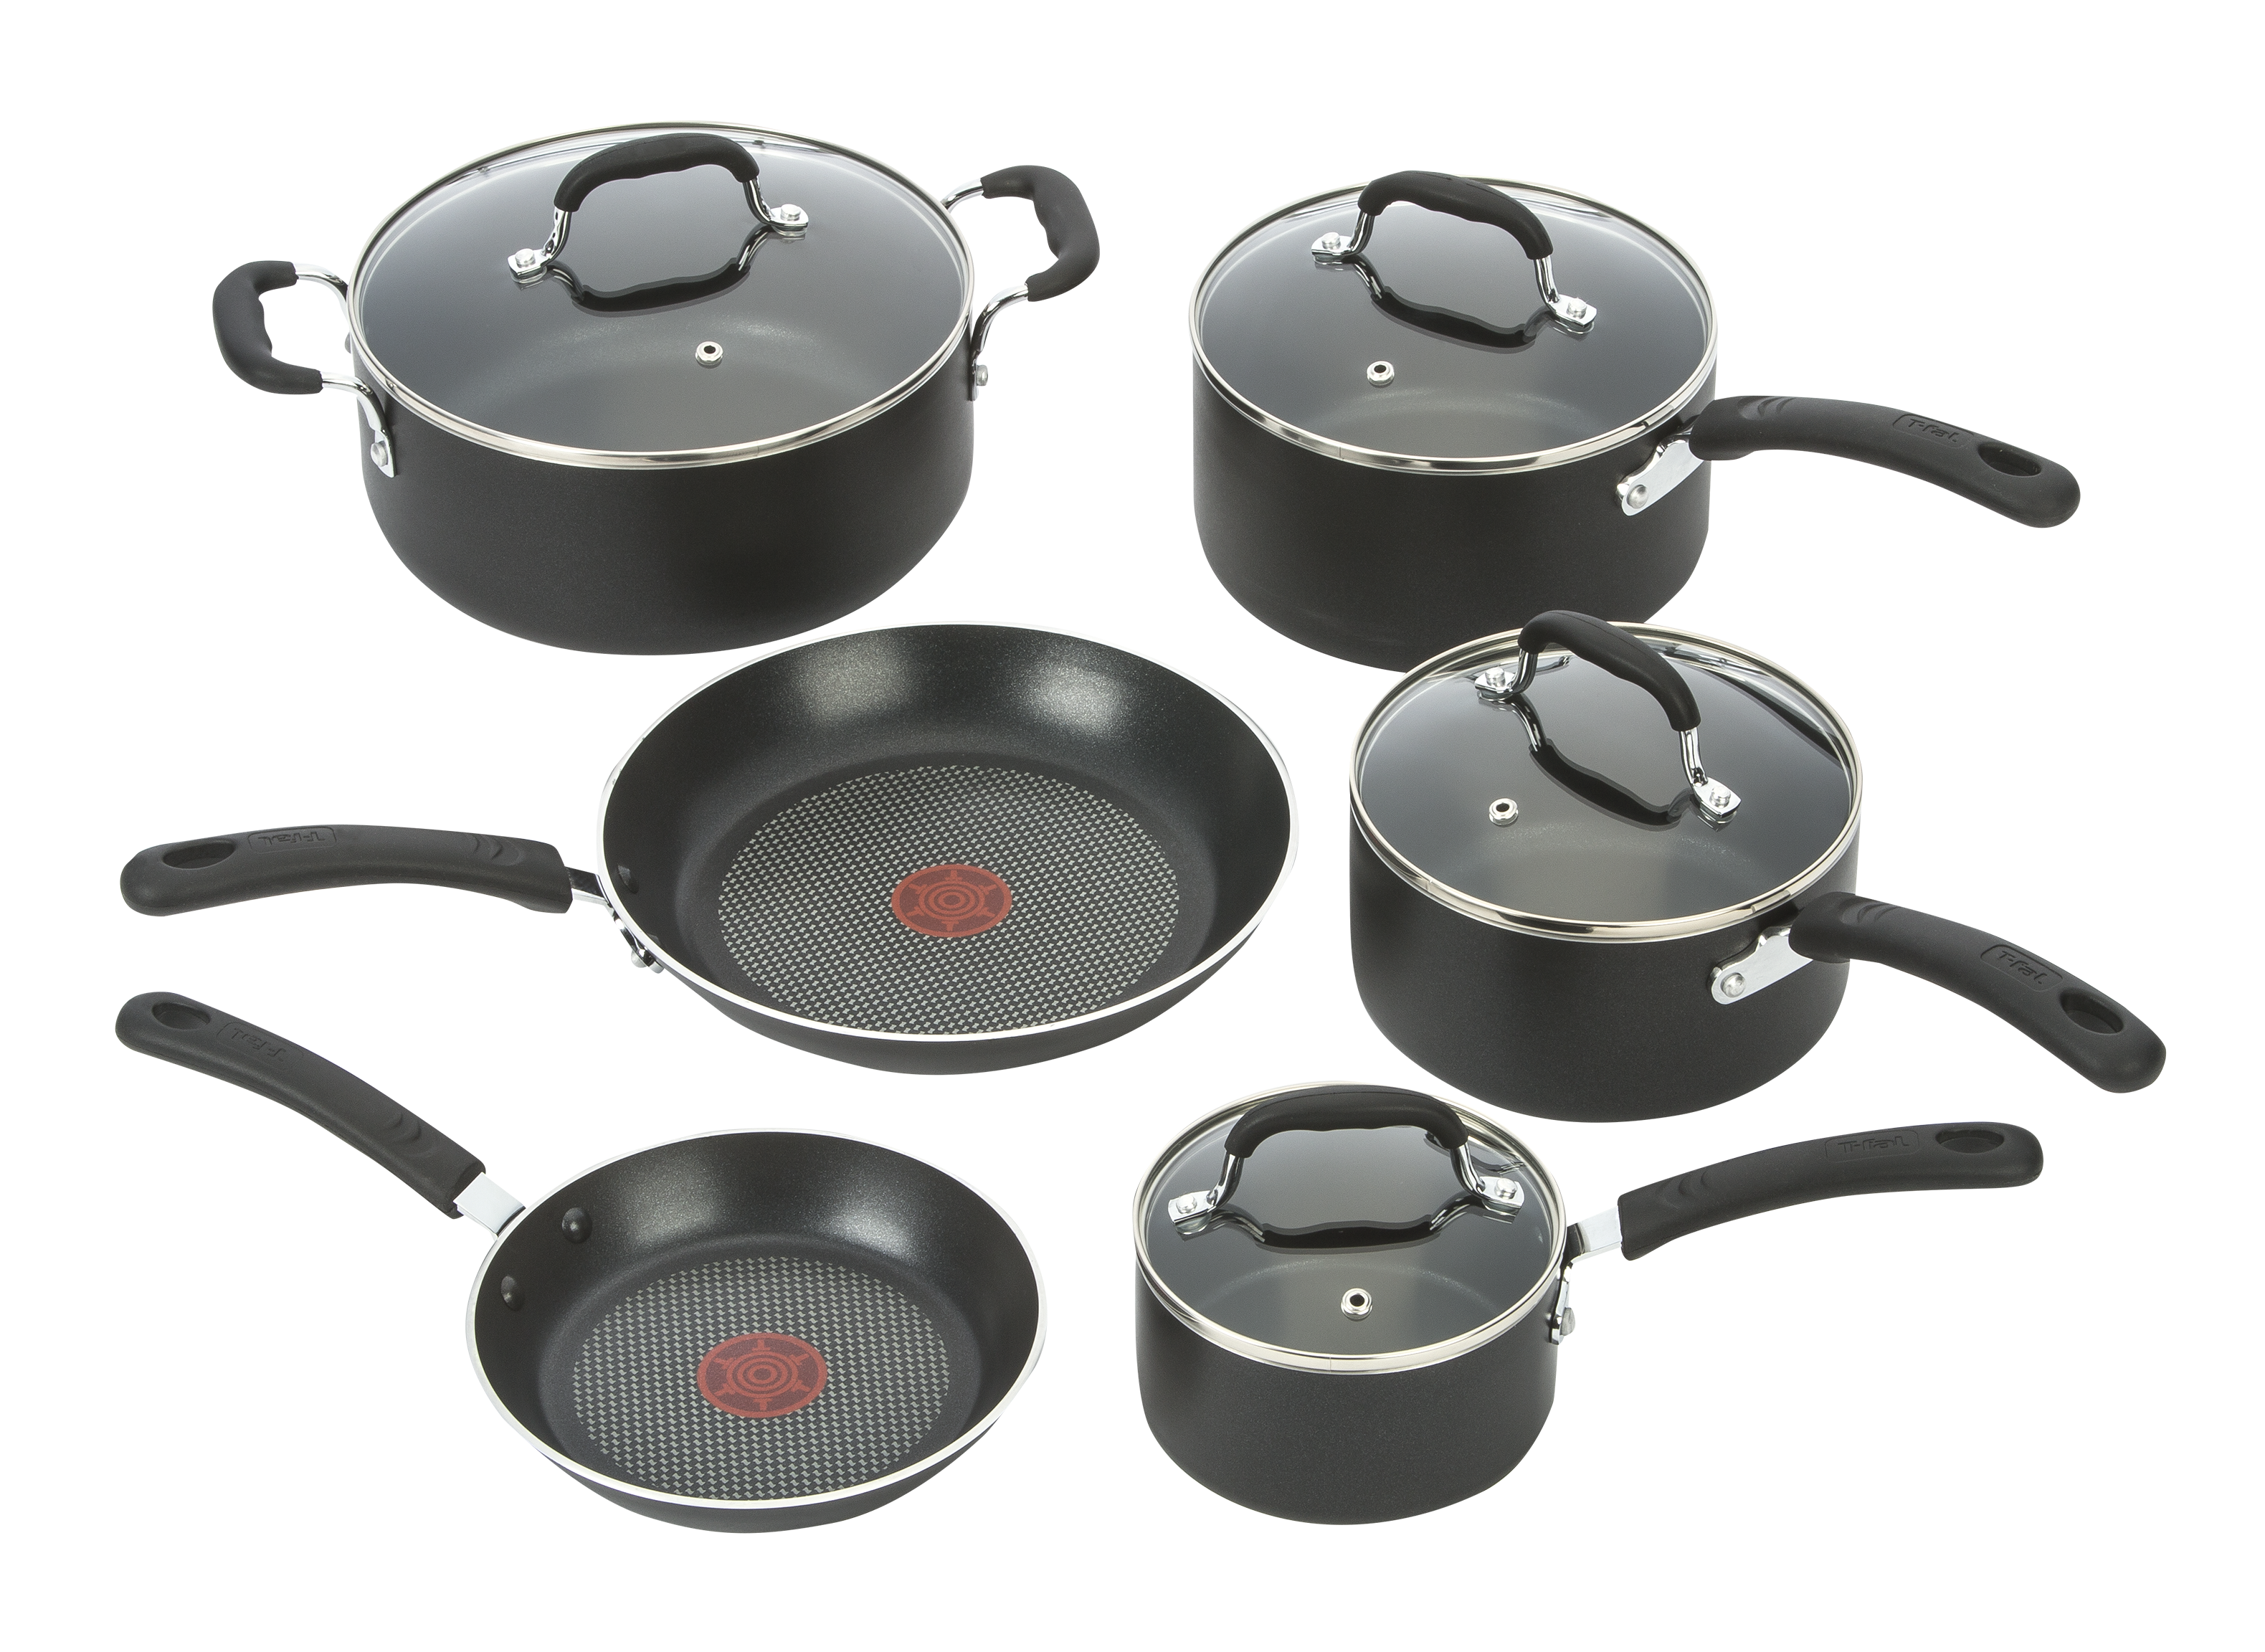 In-Depth Product Review: T-fal E93808 Professional Total Nonstick